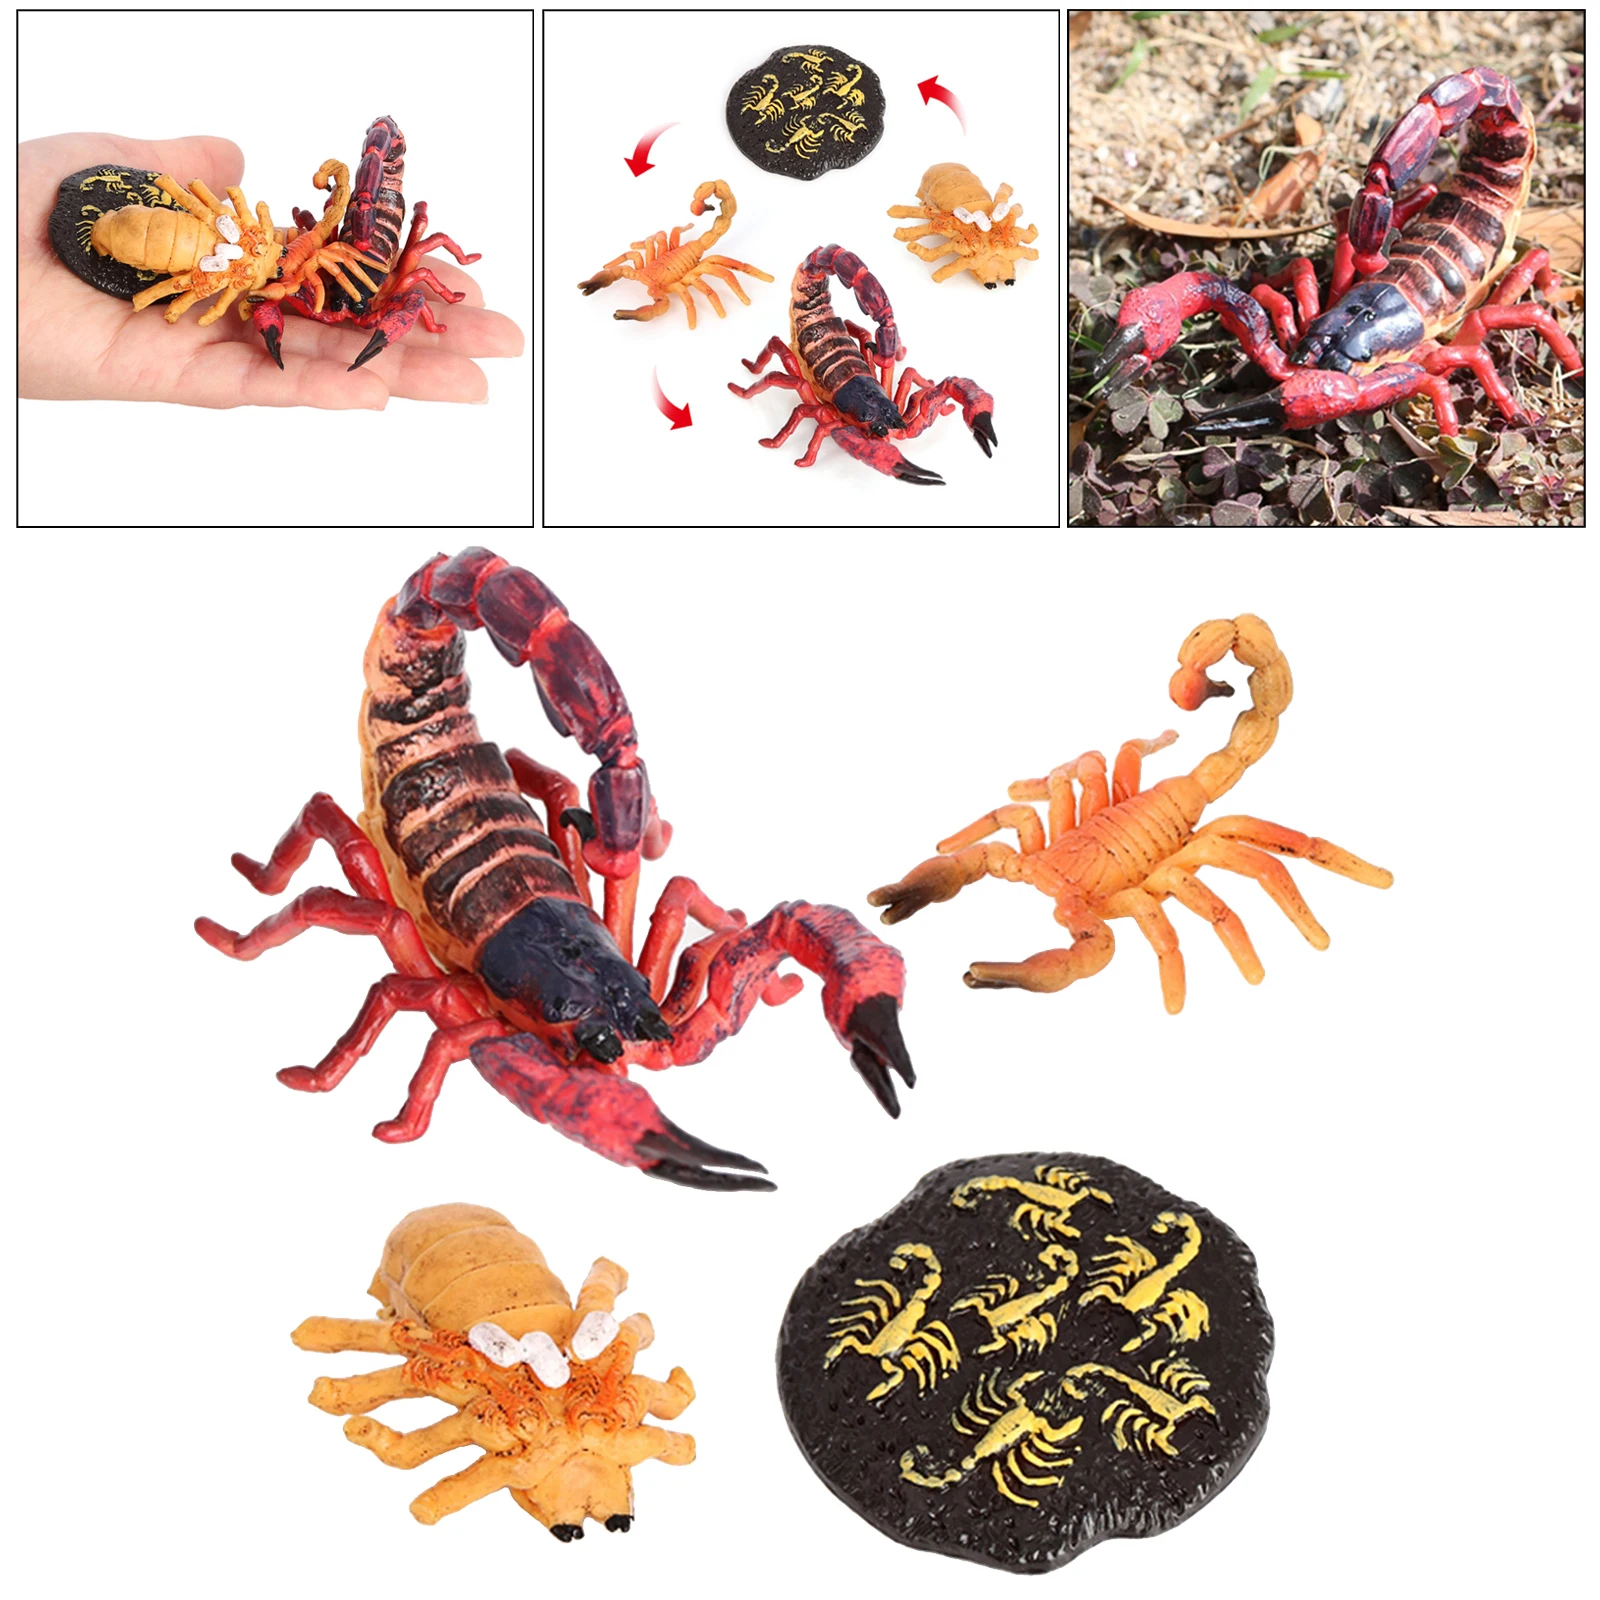 4 Stages Life Cycle of Red Scorpion Nature Insects Life Cycles Growth Model Game Prop Insect Animal Natural Toy